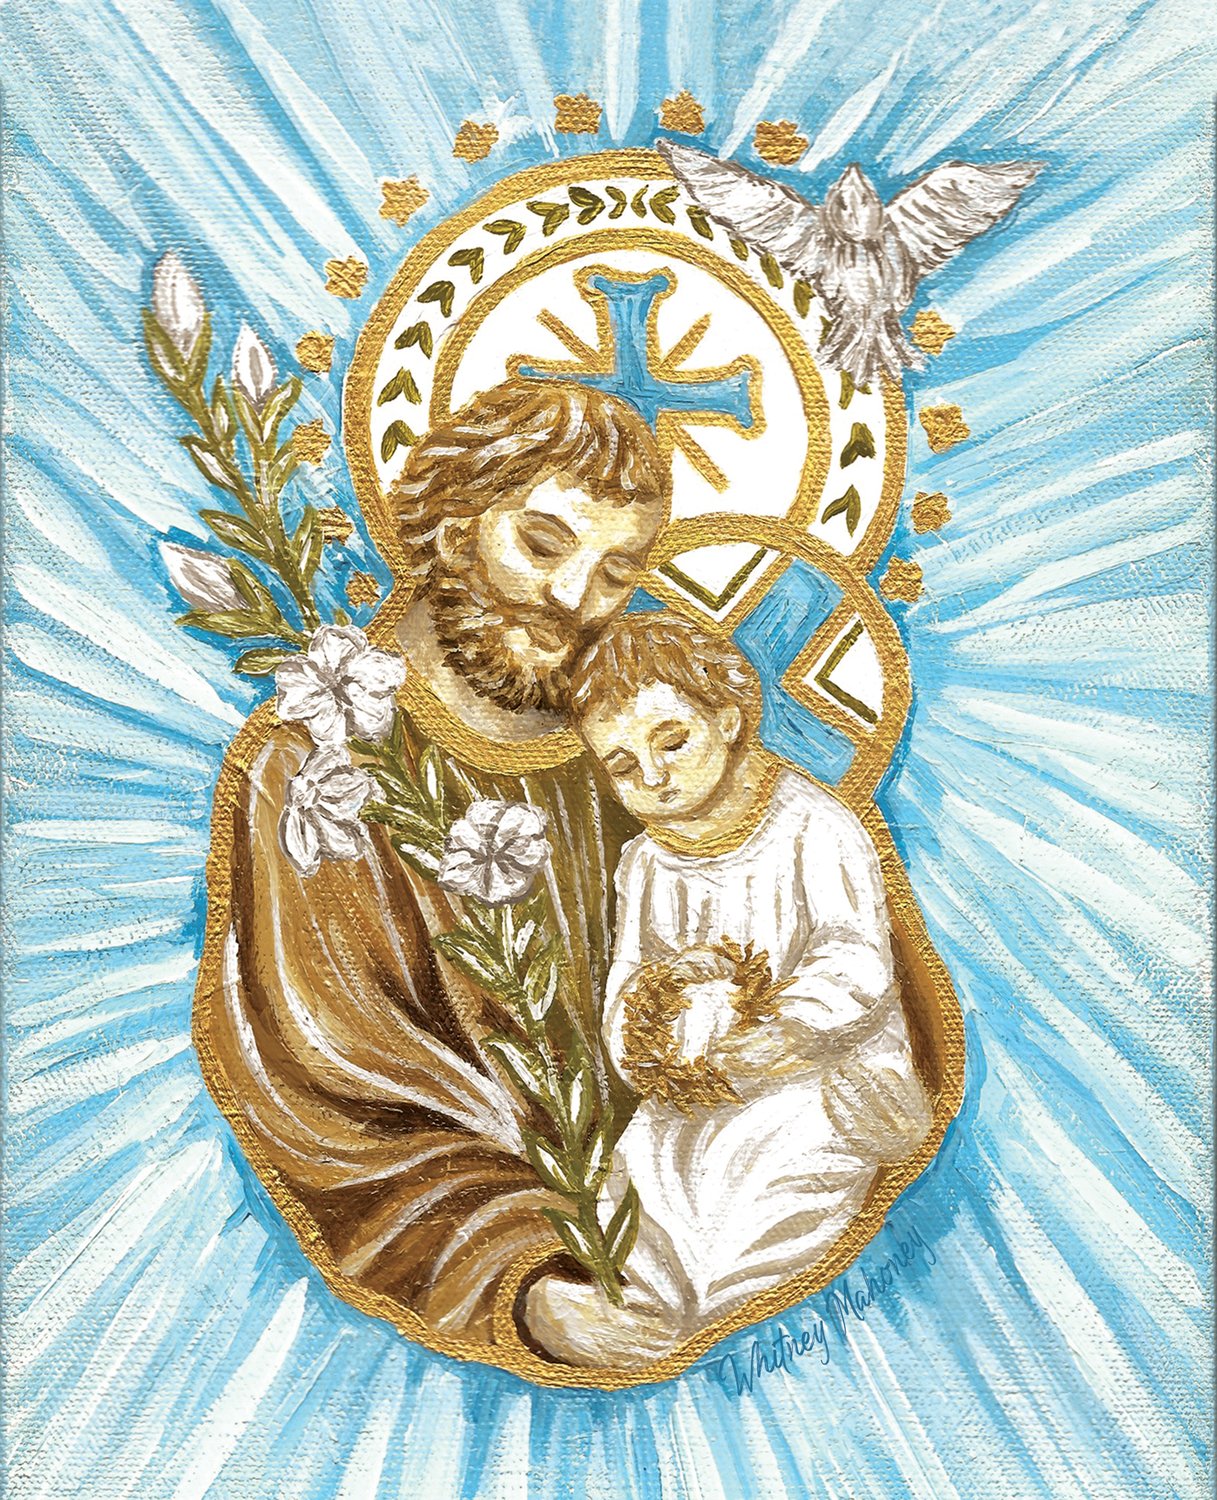 Artist Whitney Maloney created this original image of St. Joseph and the child Jesus for a prayer card for the Year of St. Joseph.